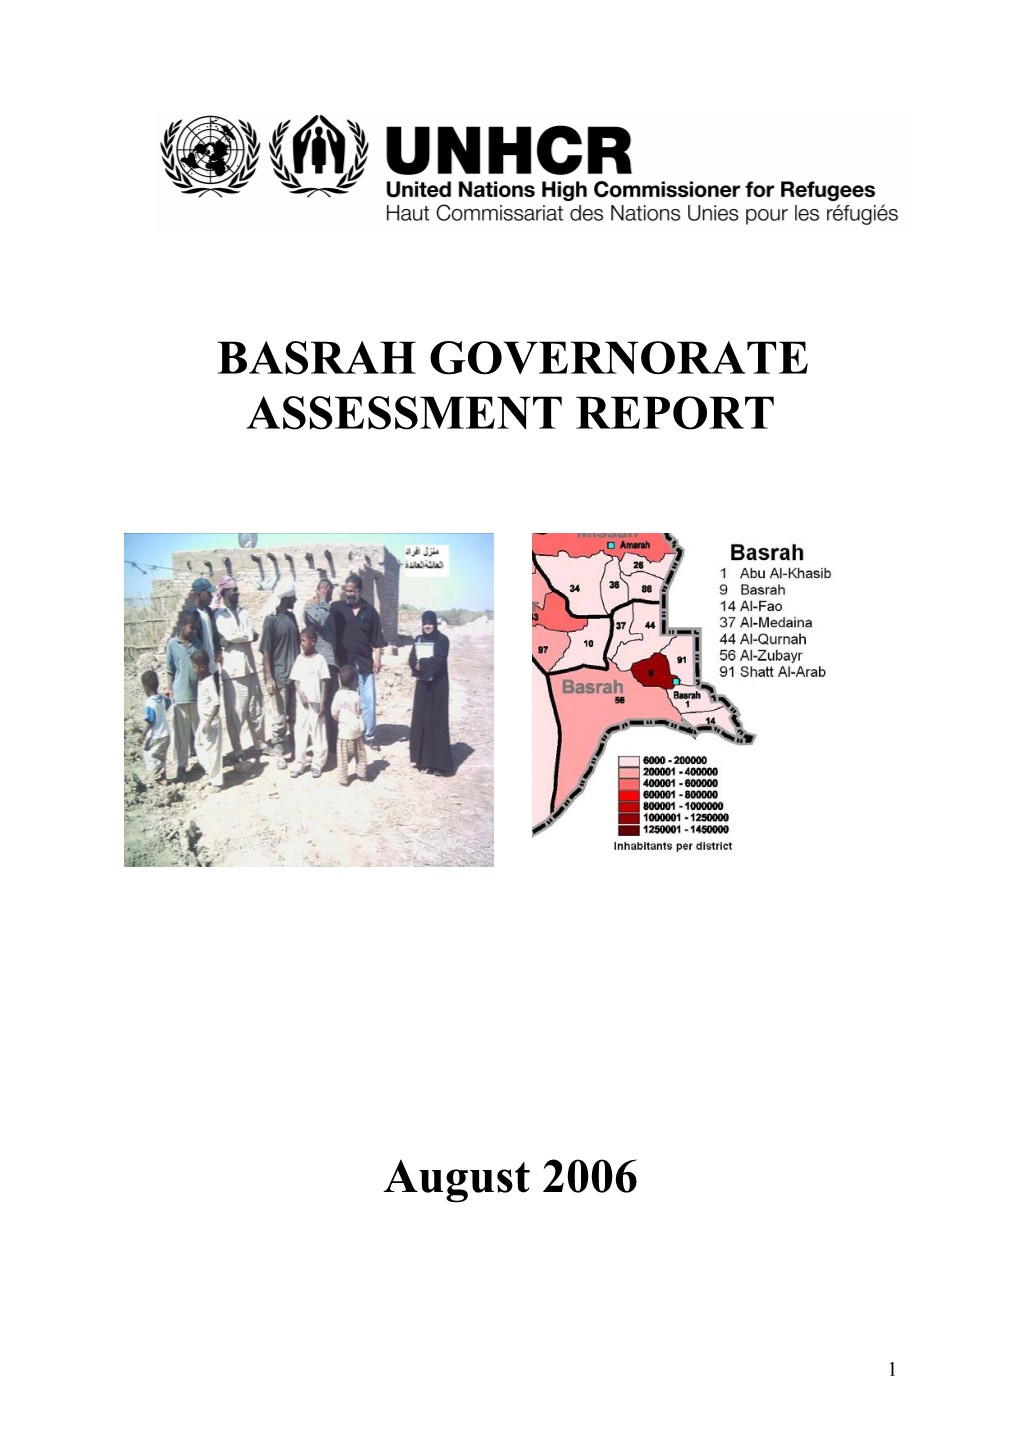 BASRAH GOVERNORATE ASSESSMENT REPORT August 2006